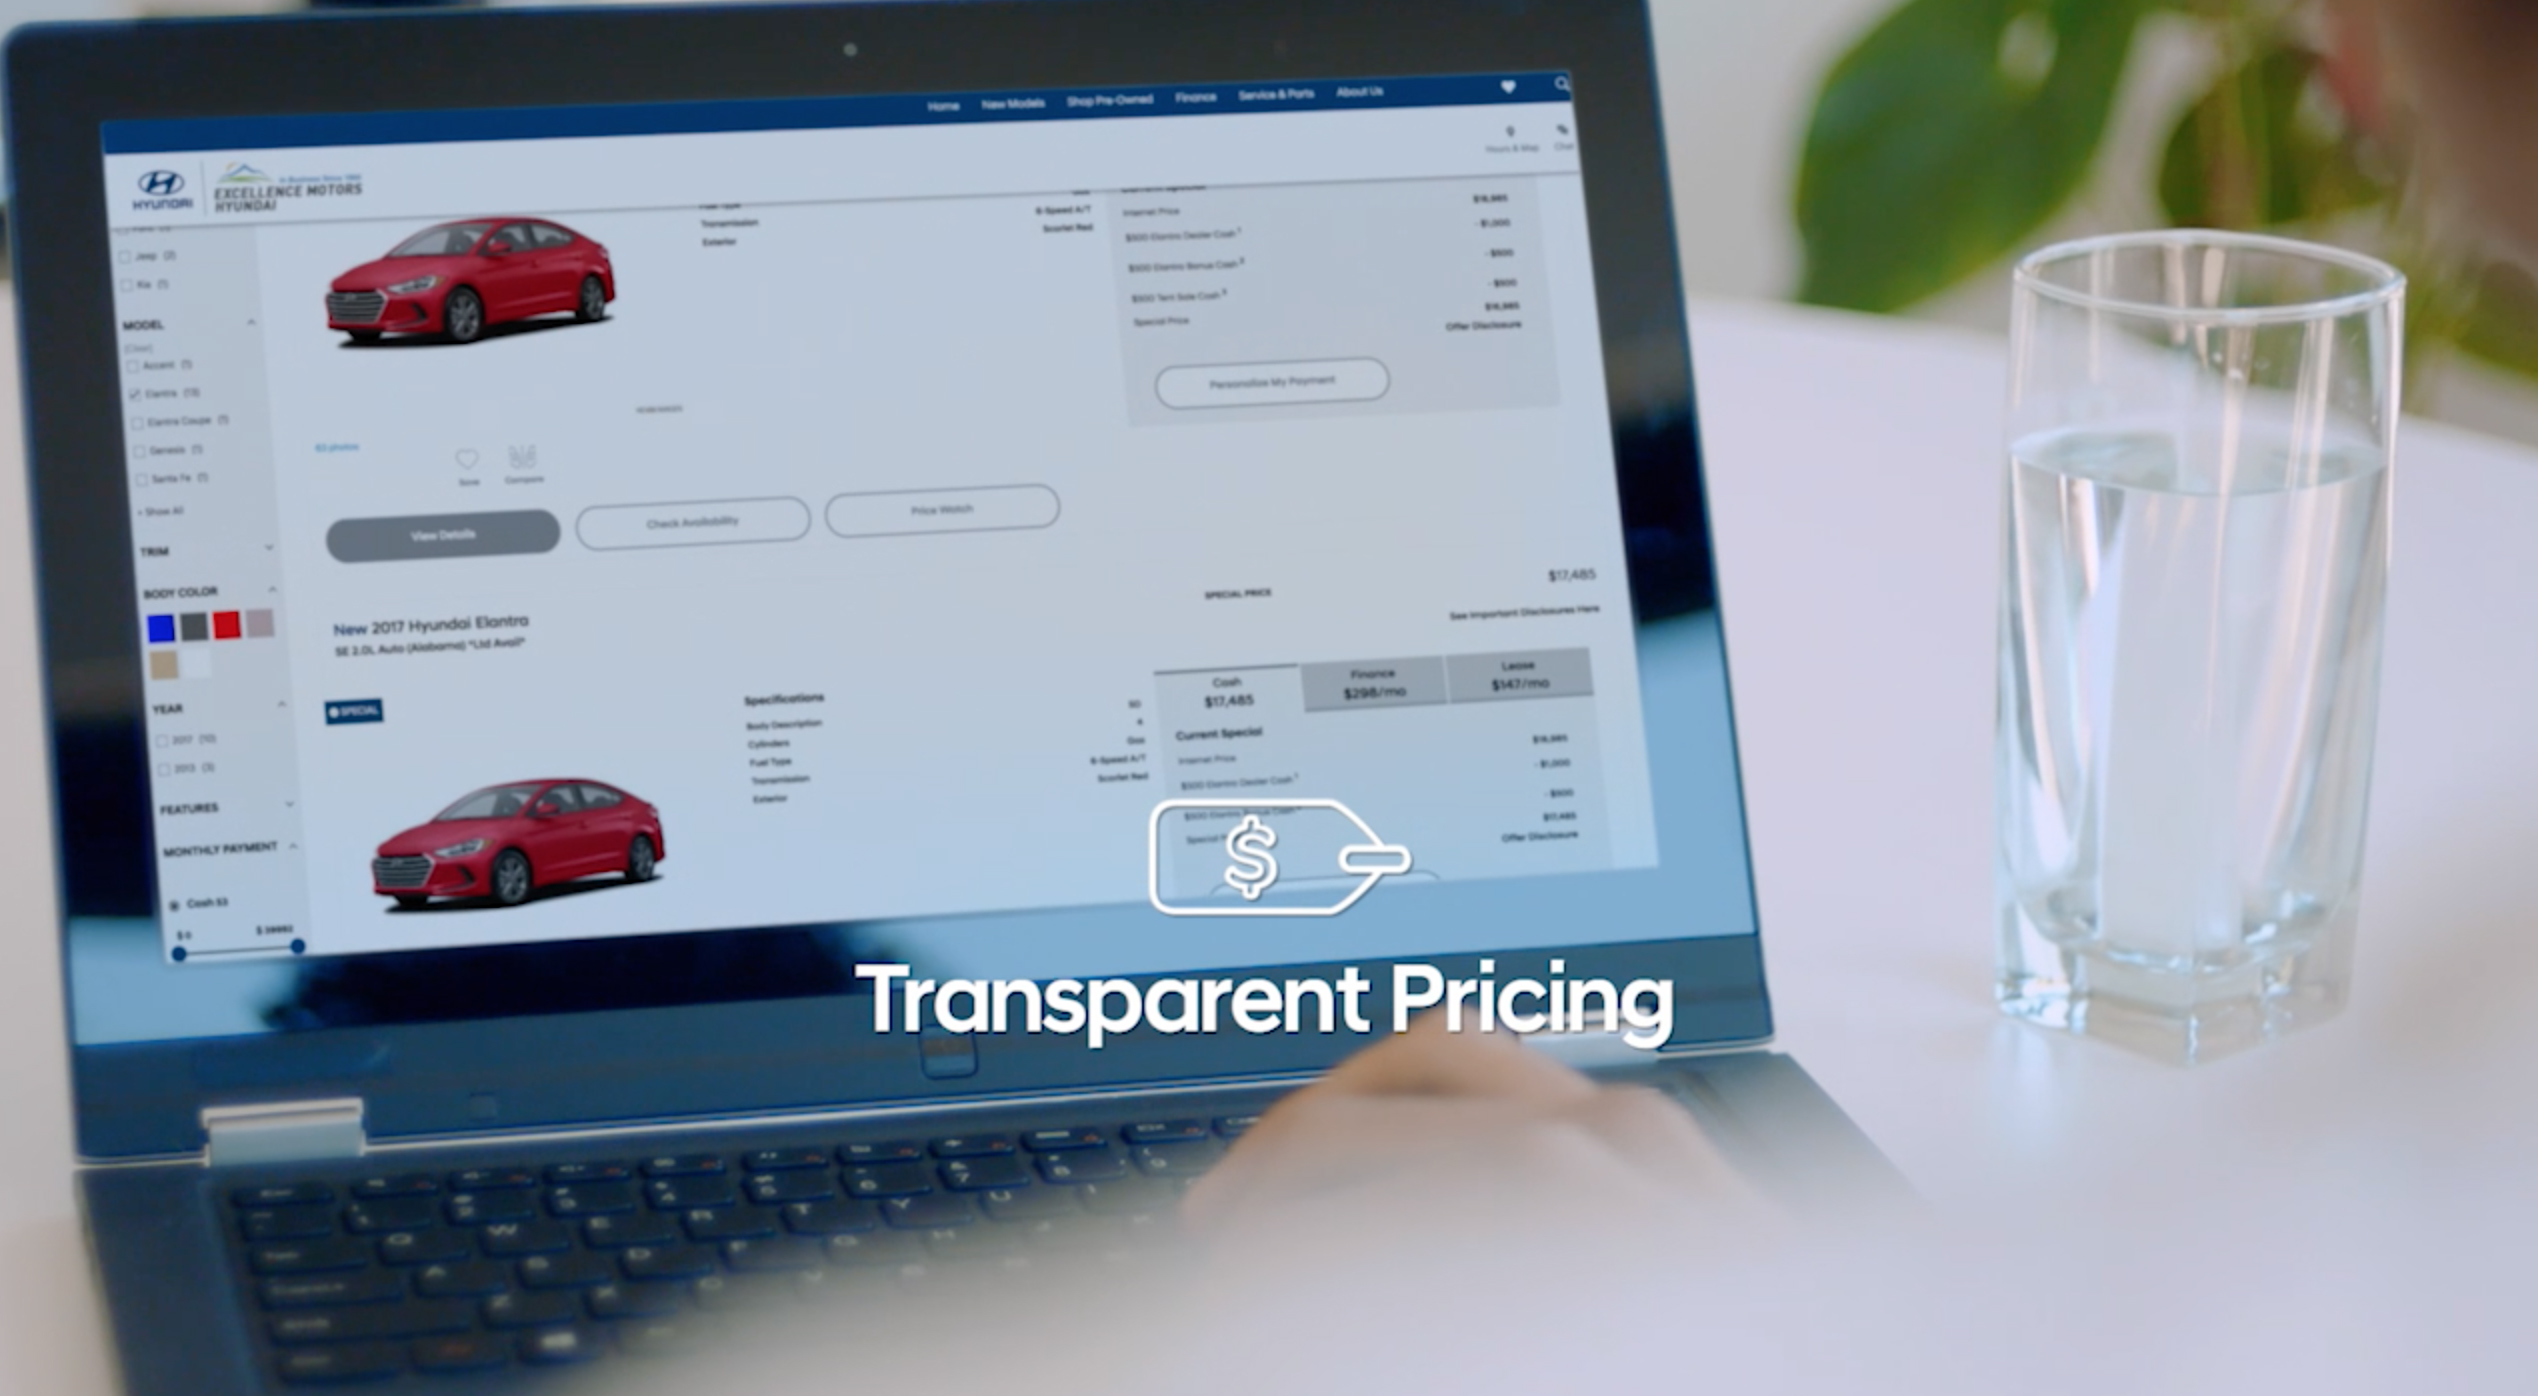 PARTICIPATING DEALERS POST THE FAIR MARKET PRICING (MSRP MINUS INCENTIVES AND ANY DEALER OFFERED DISCOUNTS) ON THE DEALER WEBSITES, SO THE CUSTOMER KNOWS EXACTLY WHAT THE MARKET PRICING IS FOR THE VEHICLE.